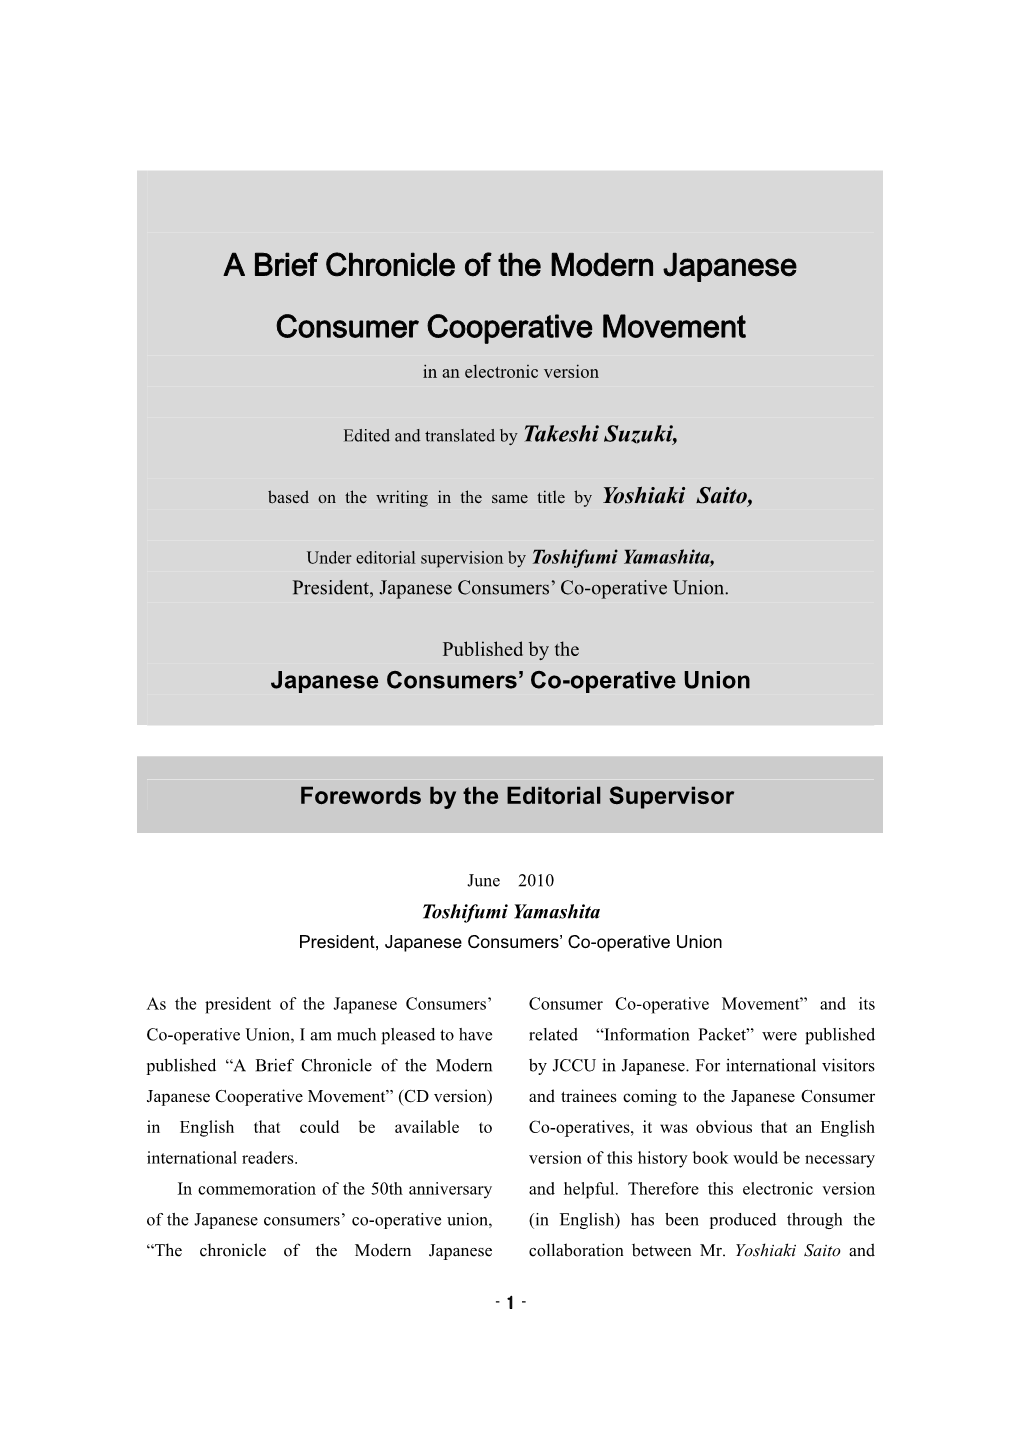 A Brief Chronicle of the Modern Japanese Consumer Cooperative Movement in an Electronic Version